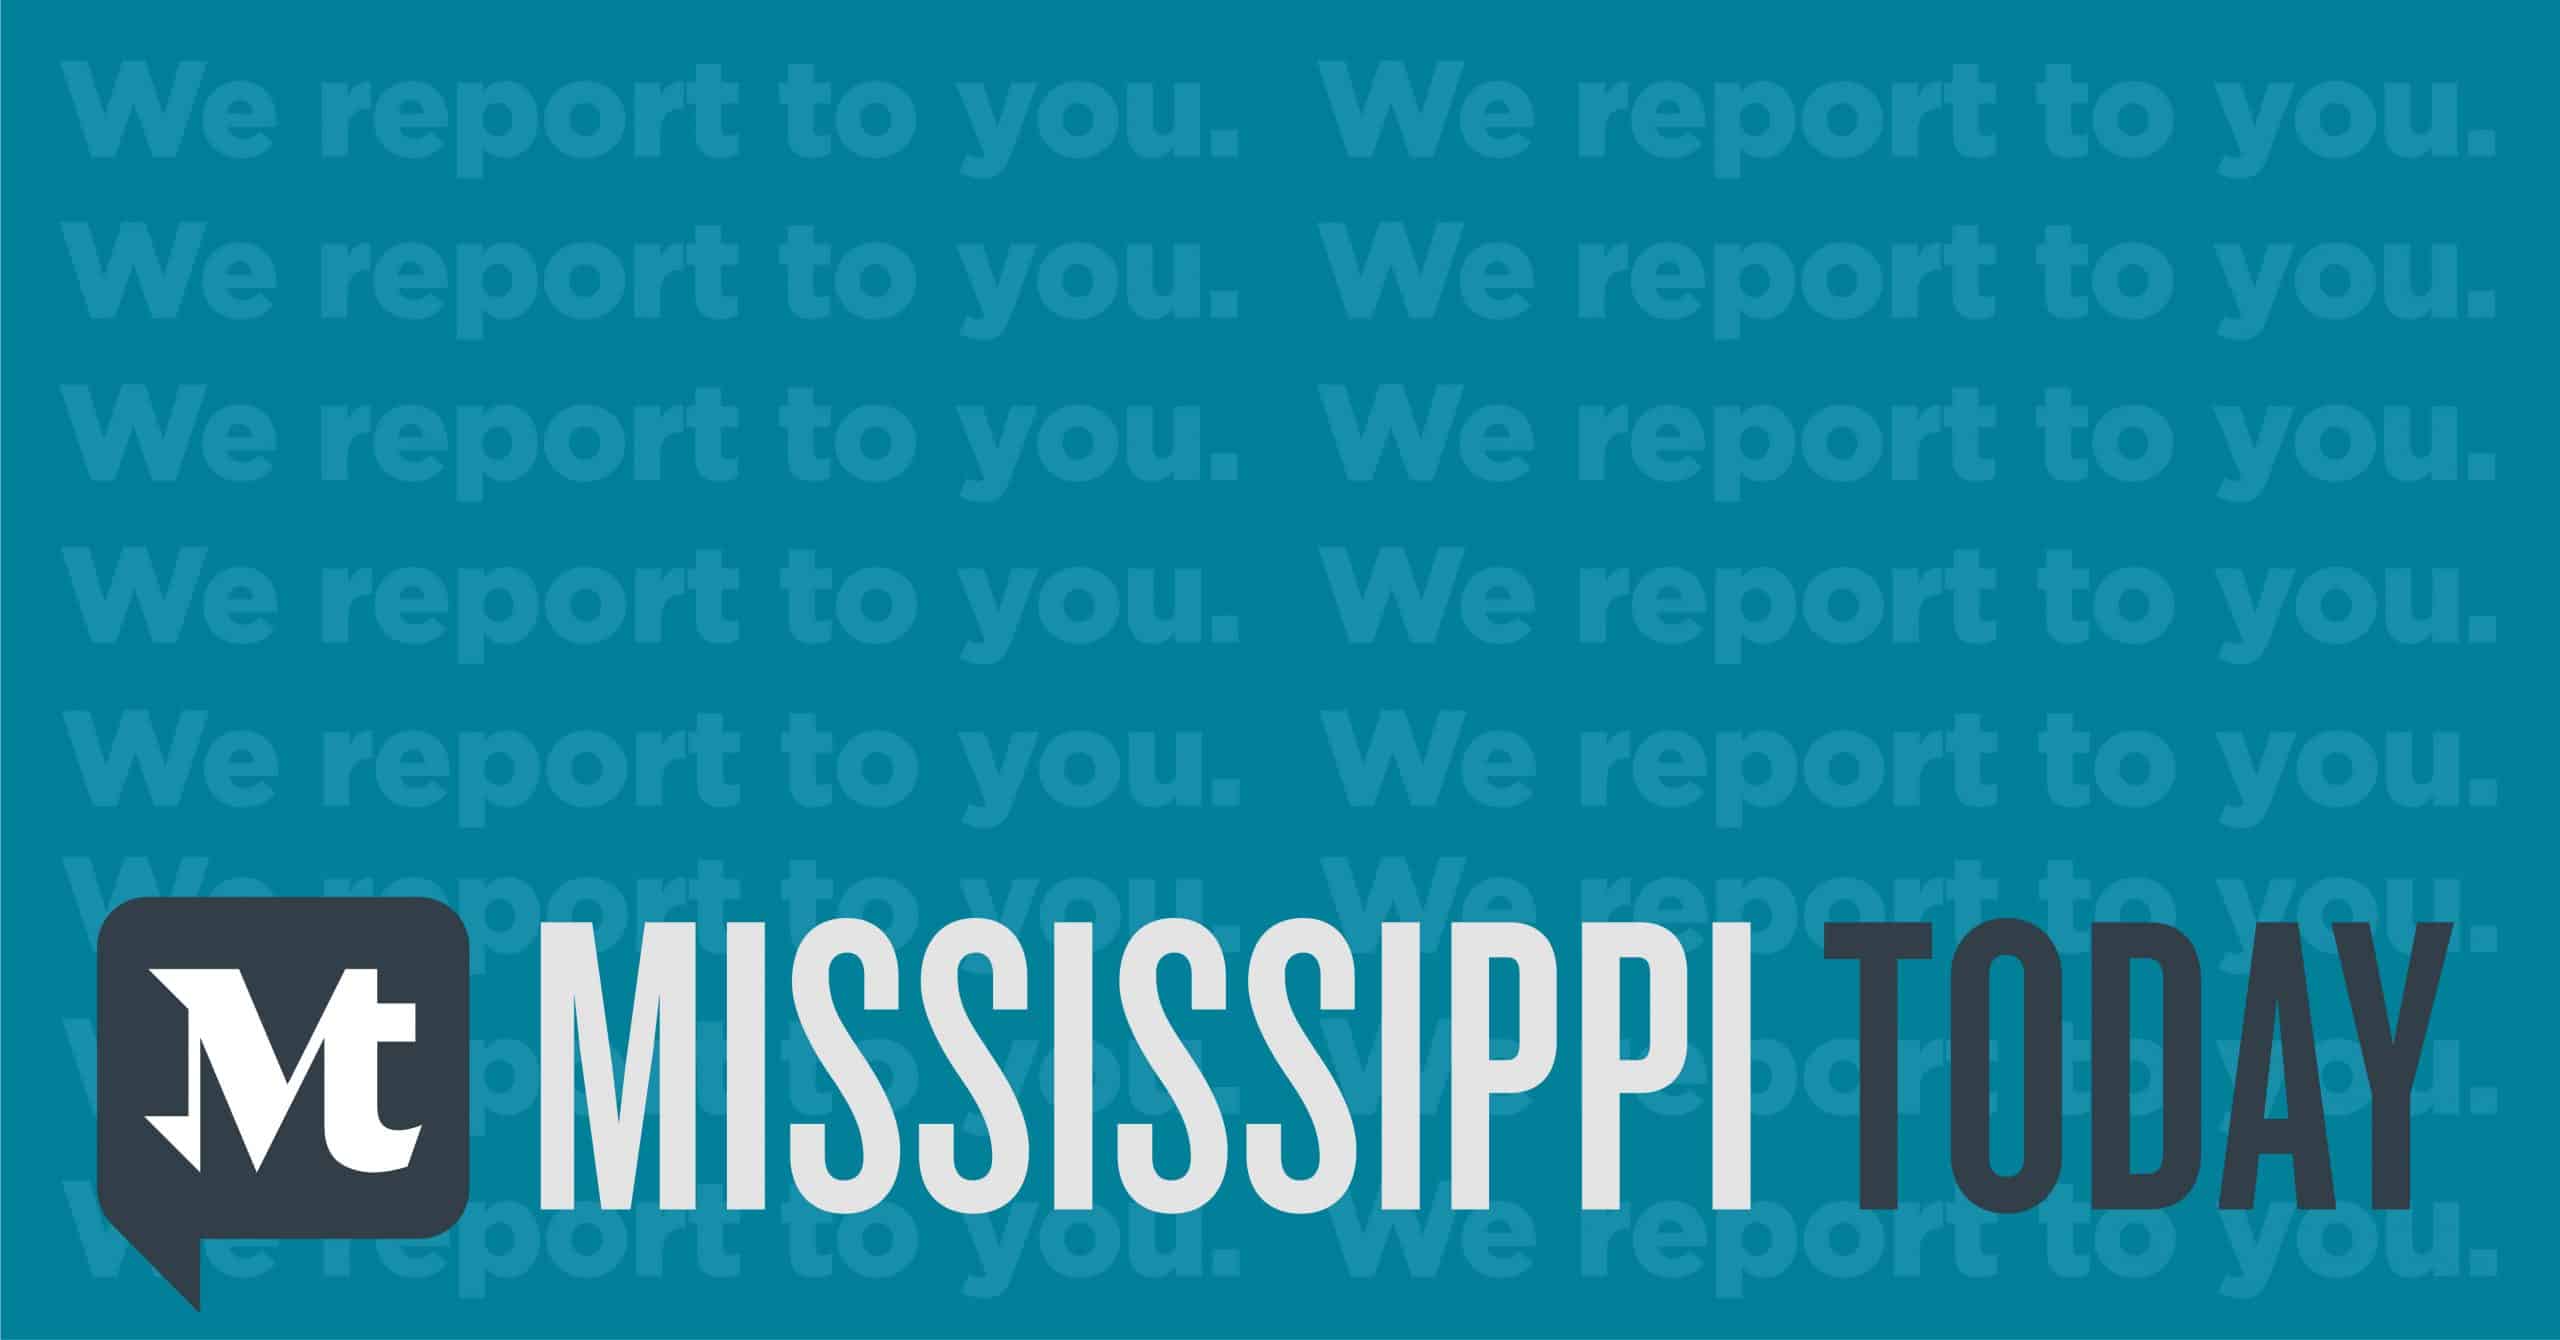 Mississippi Today (Social Sharing Image)